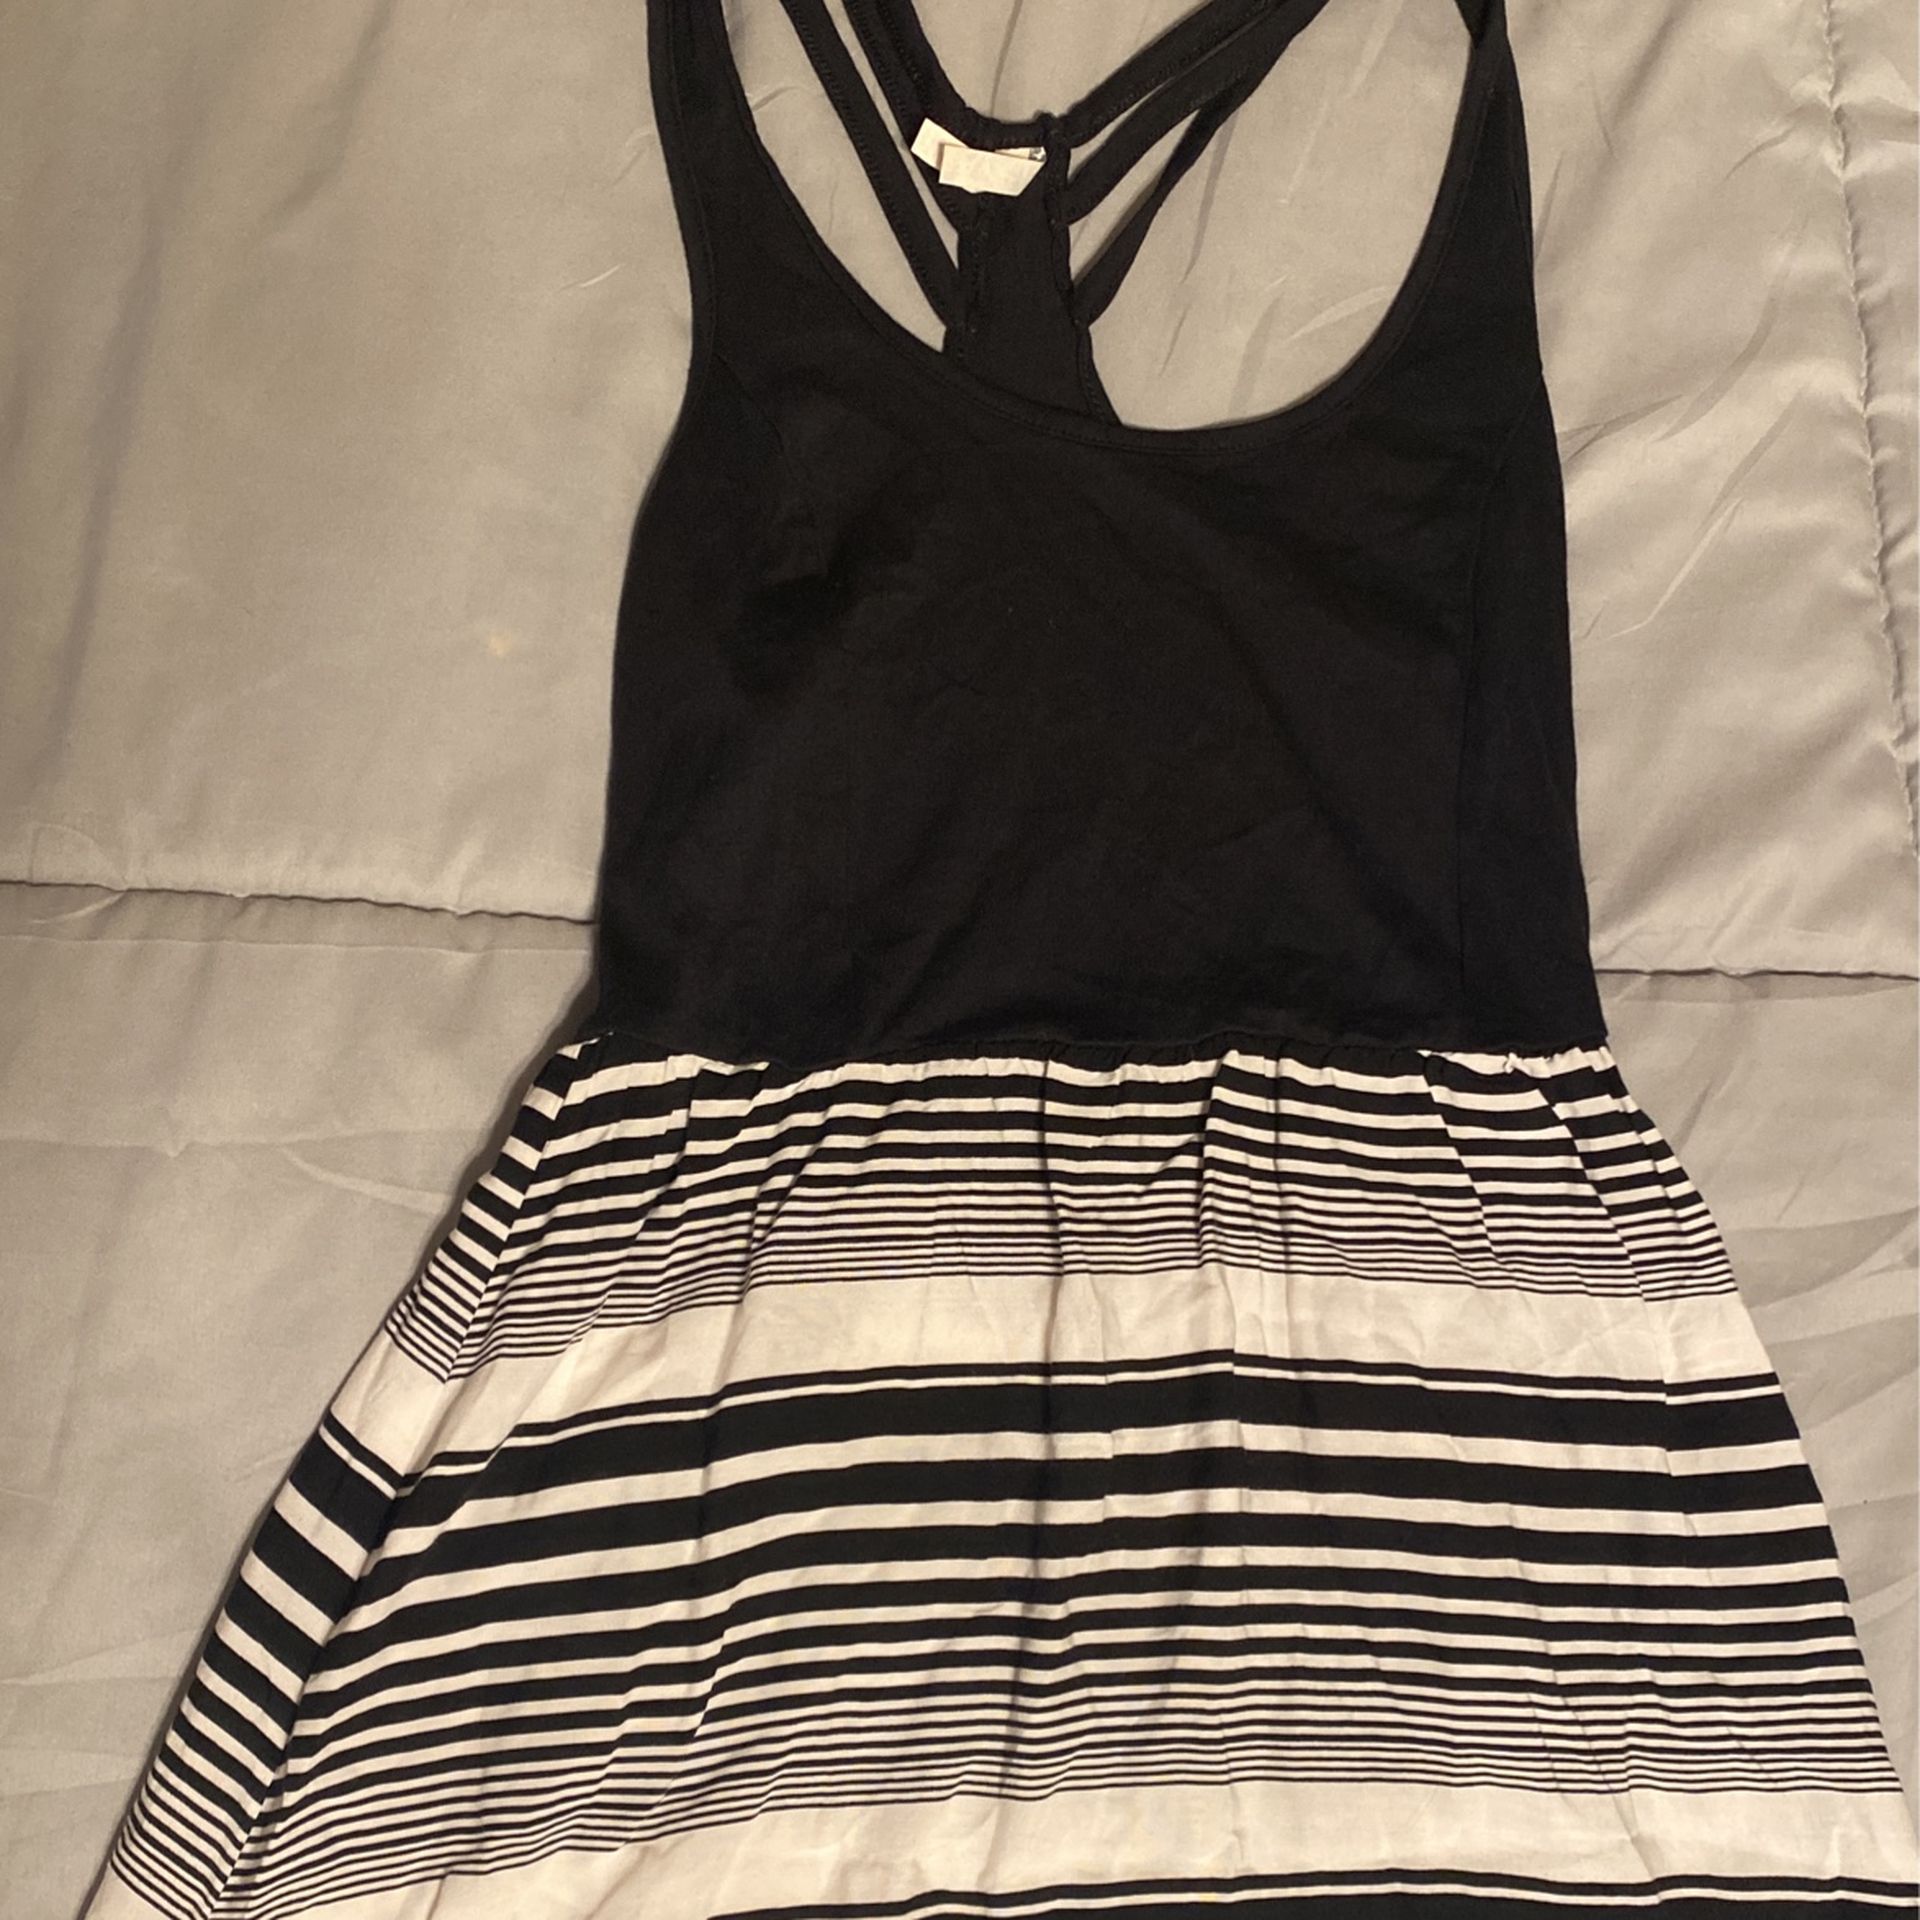 Black And White Stripe Dress On The Bottom Solid  Black On Top